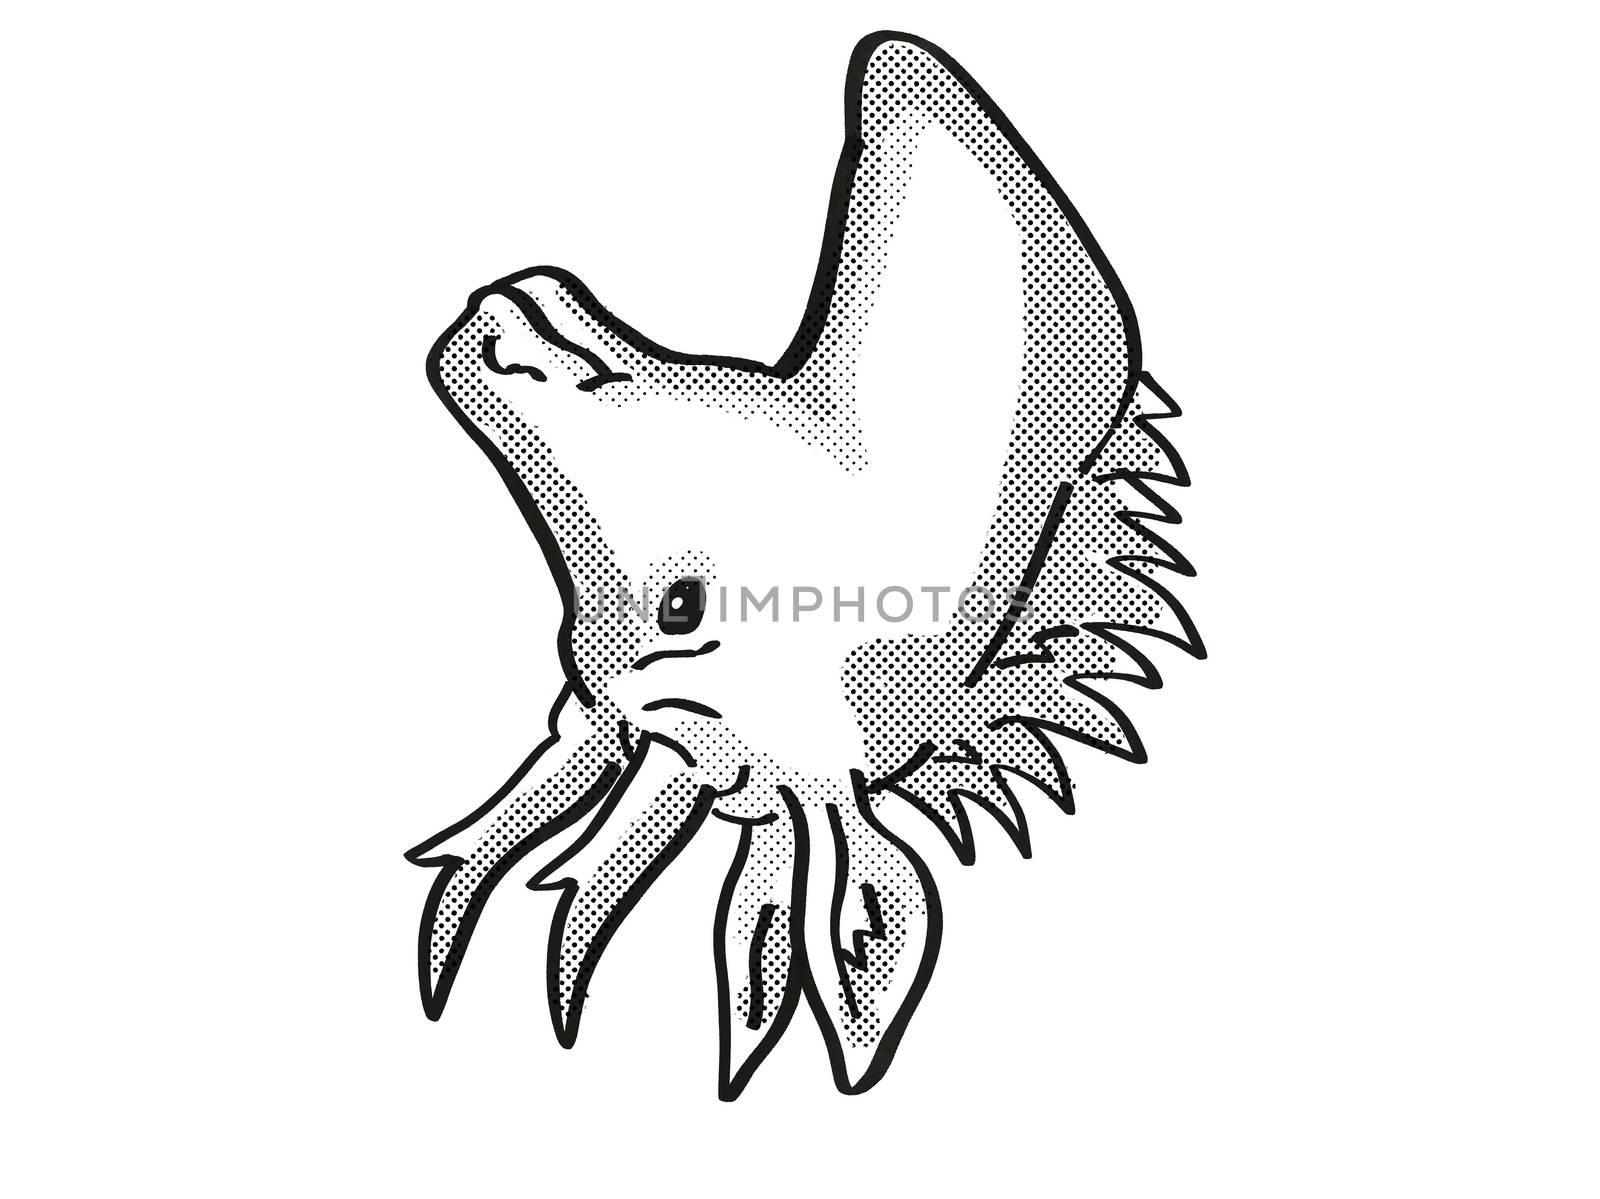 Retro cartoon mono line style drawing of head of a pronghorn antelope, the fastest hoofed animal in North America, an endangered wildlife species on isolated white background done in black and white.